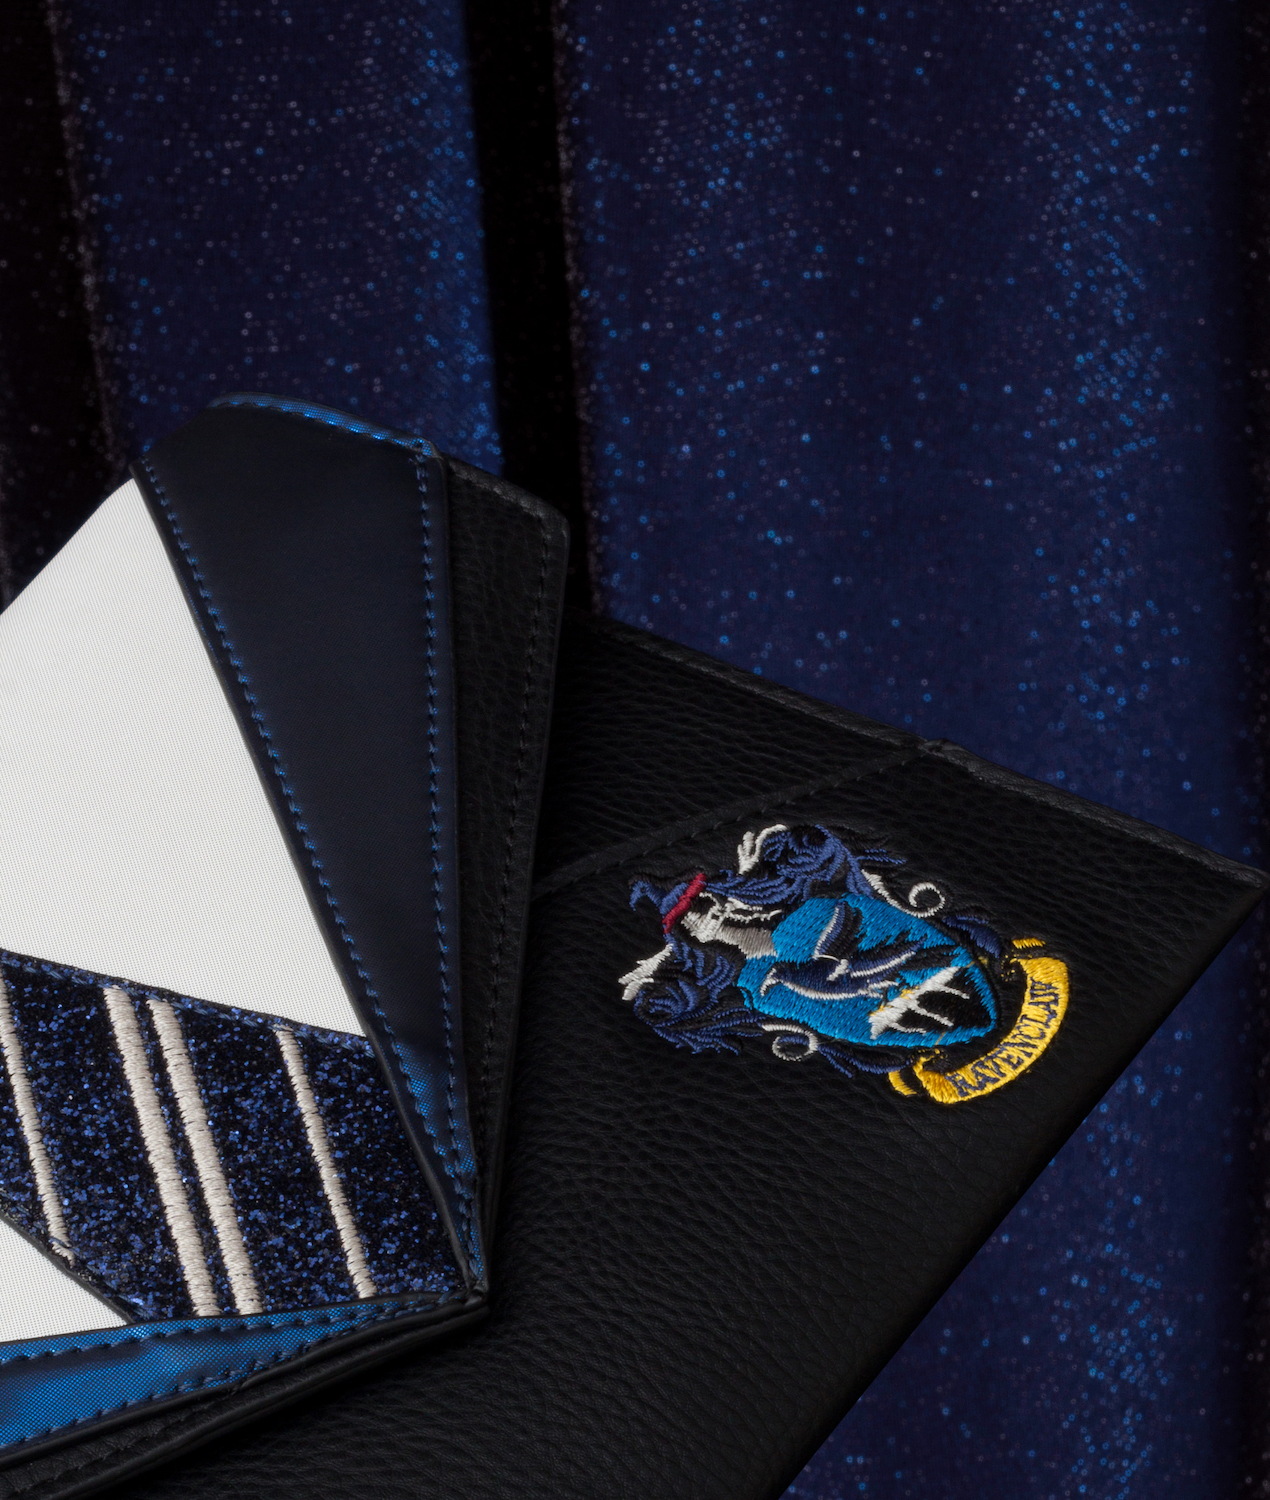 The Danielle Nicole Ravenclaw Uniform Clutch is for the wise and witty.